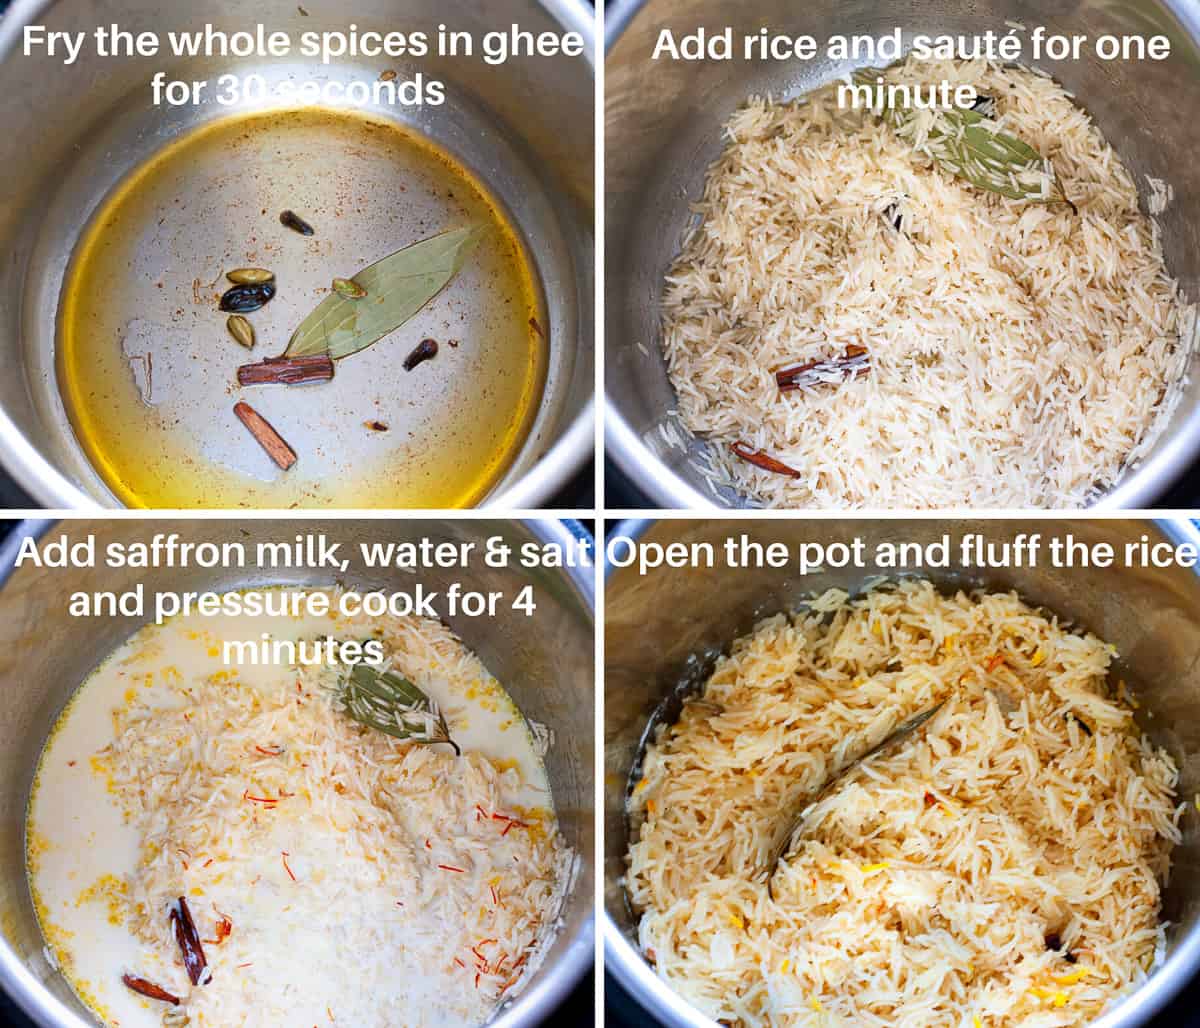 steps in cooking the rice in instant pot.